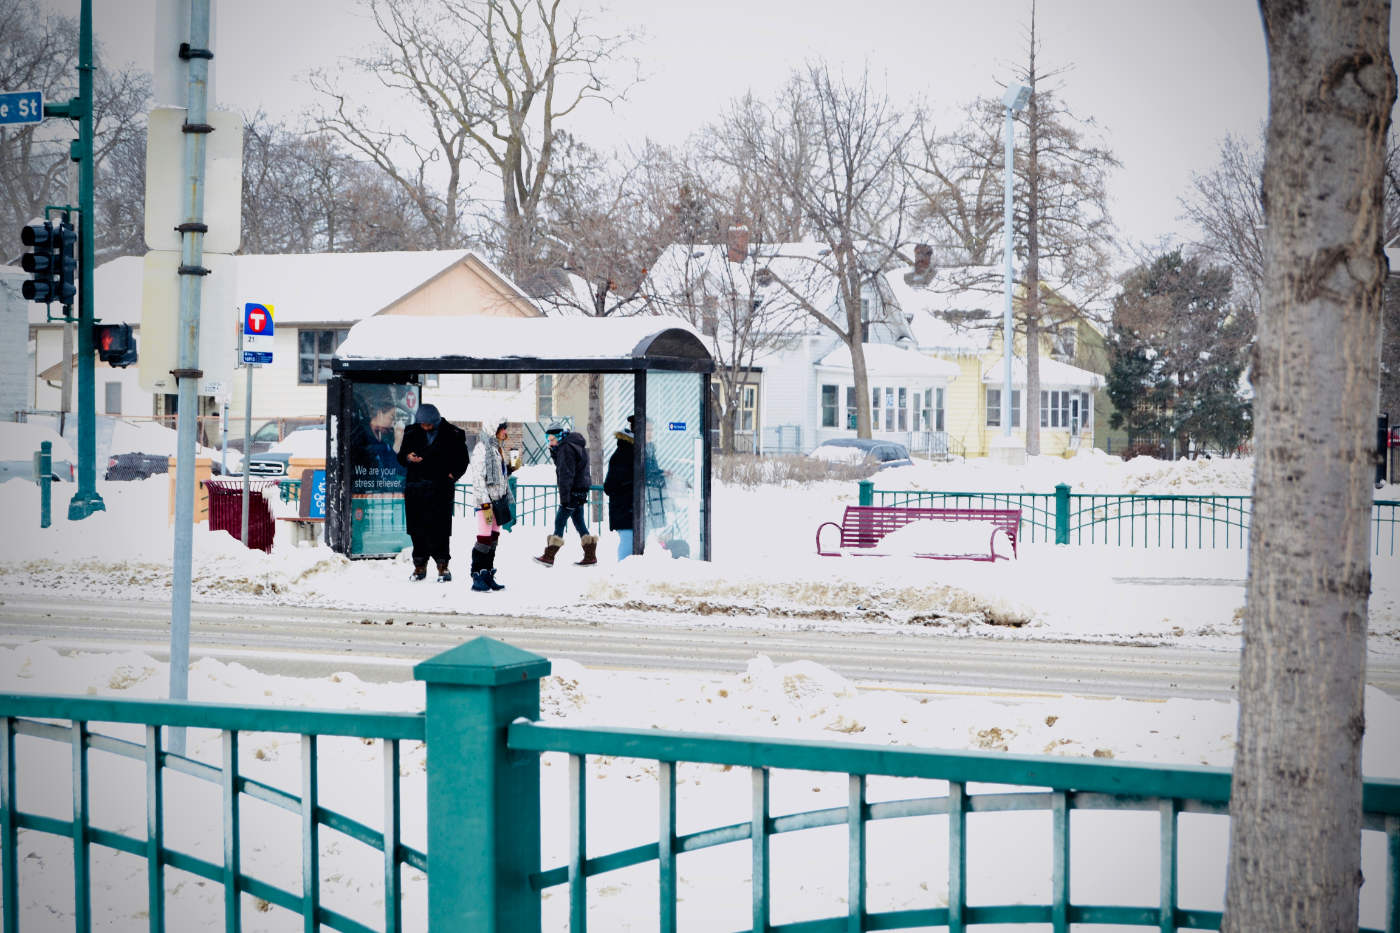 four people waiting at a bus stop with snow cover